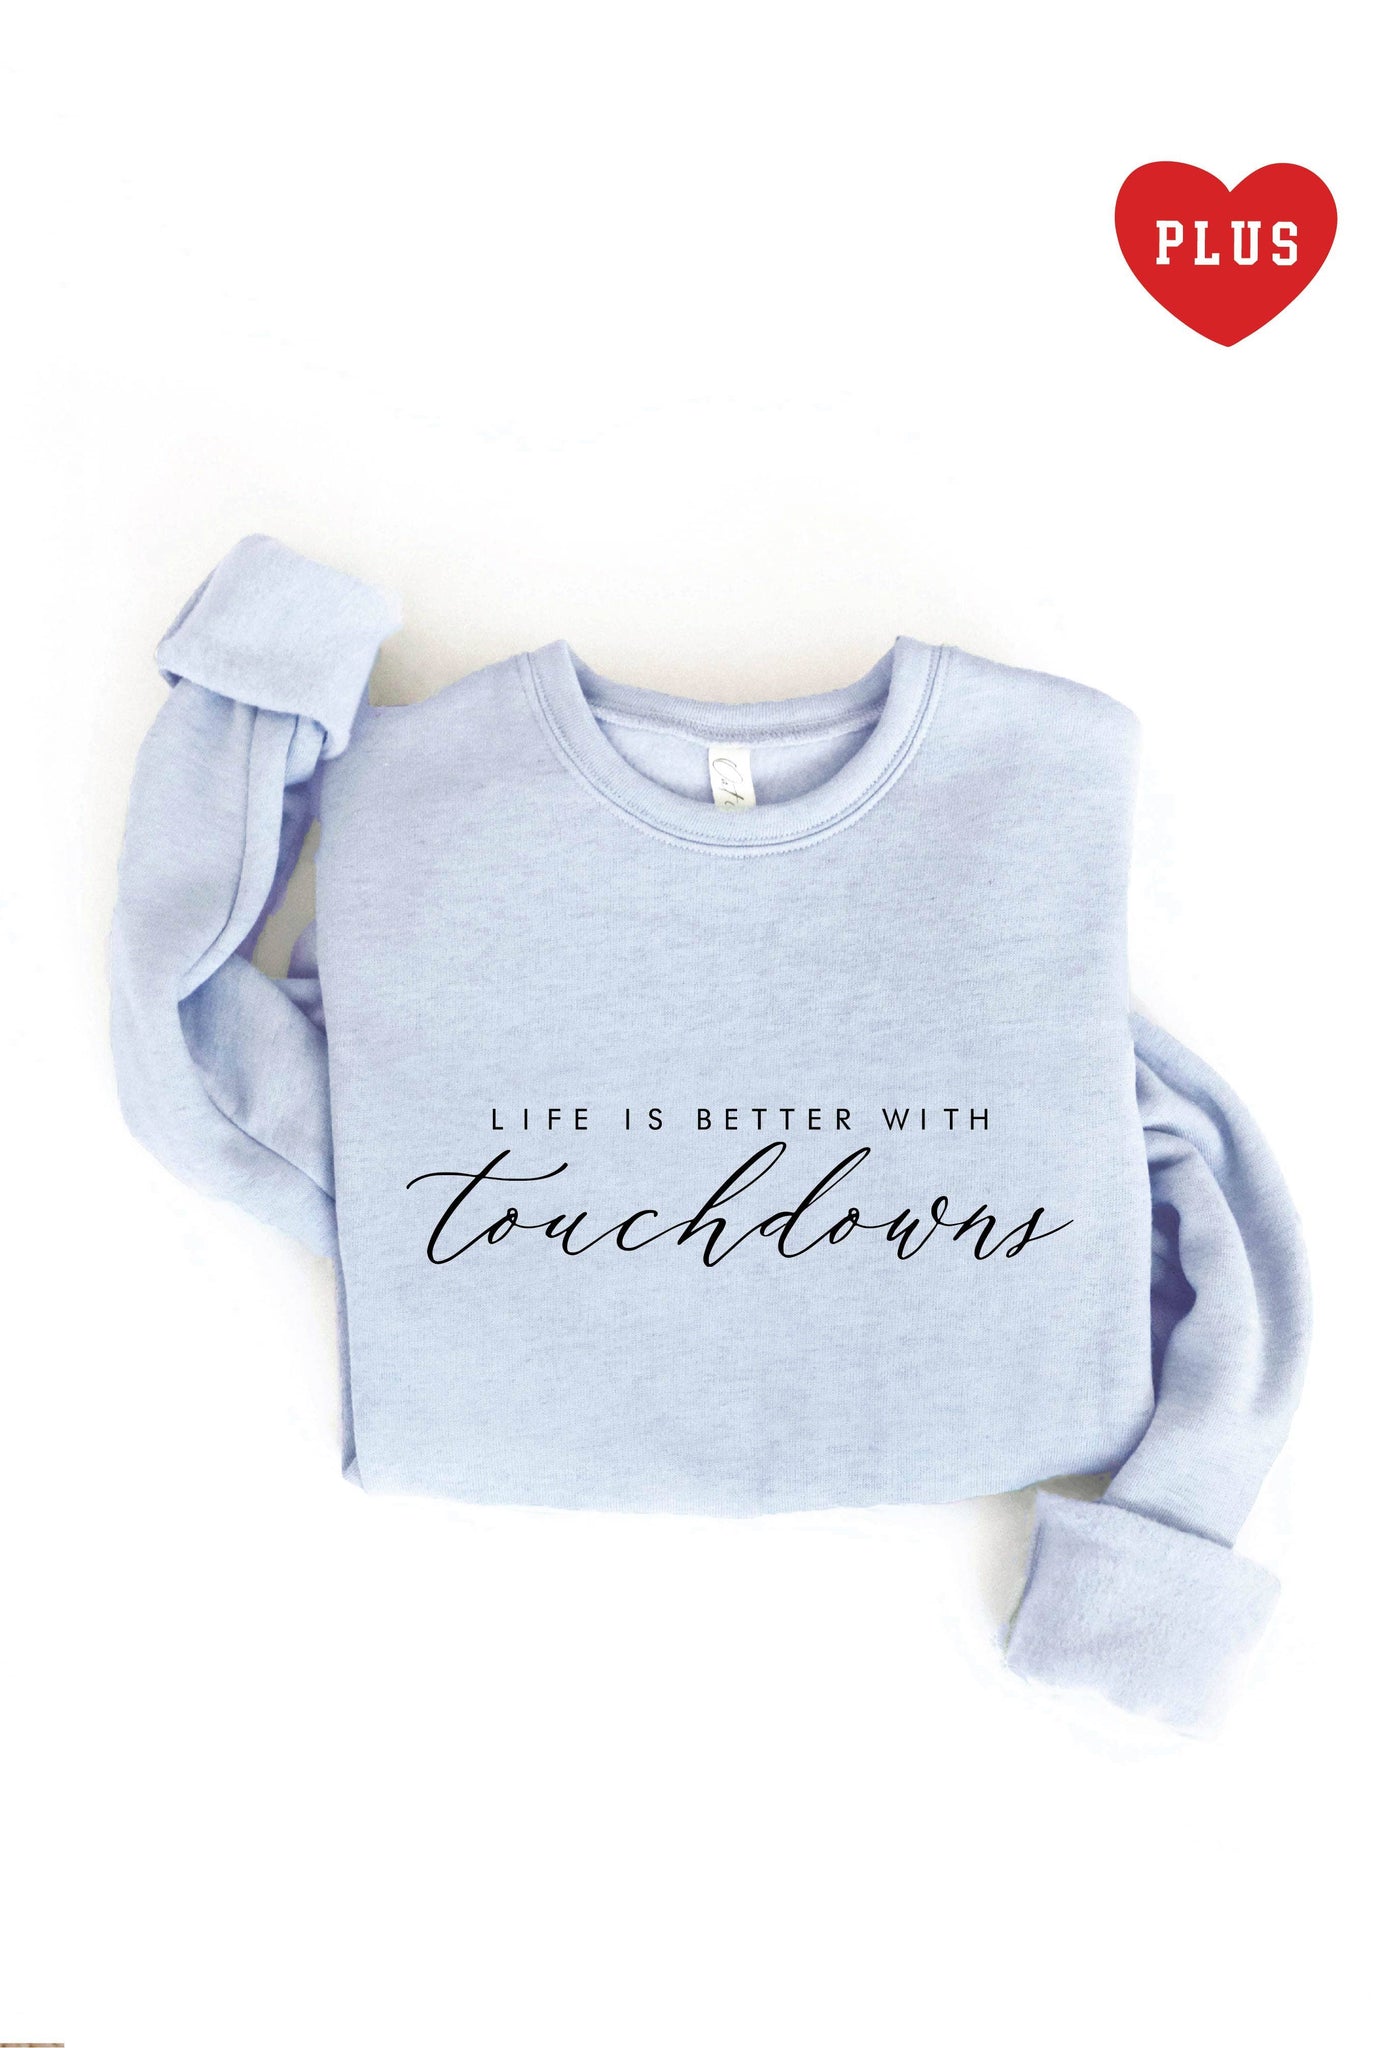 LIFE IS BETTER WITH TOUCHDOWNS LIGHT BLUE Plus Sweatshirt